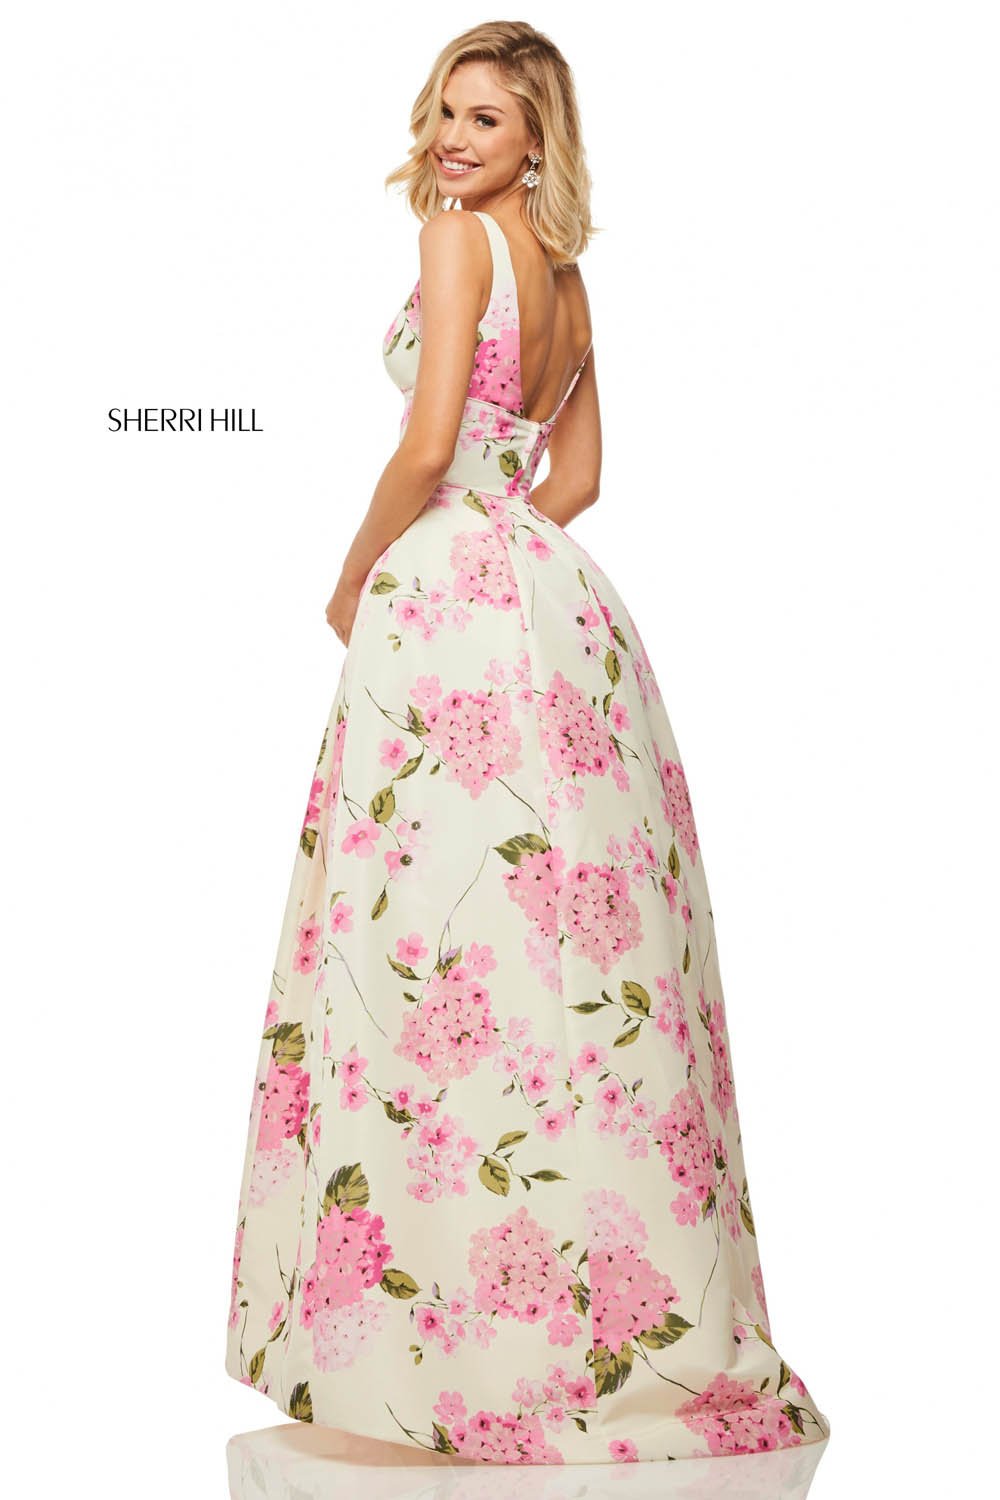 Sherri Hill 52862 dress images in these colors: Ivory Pink Print.